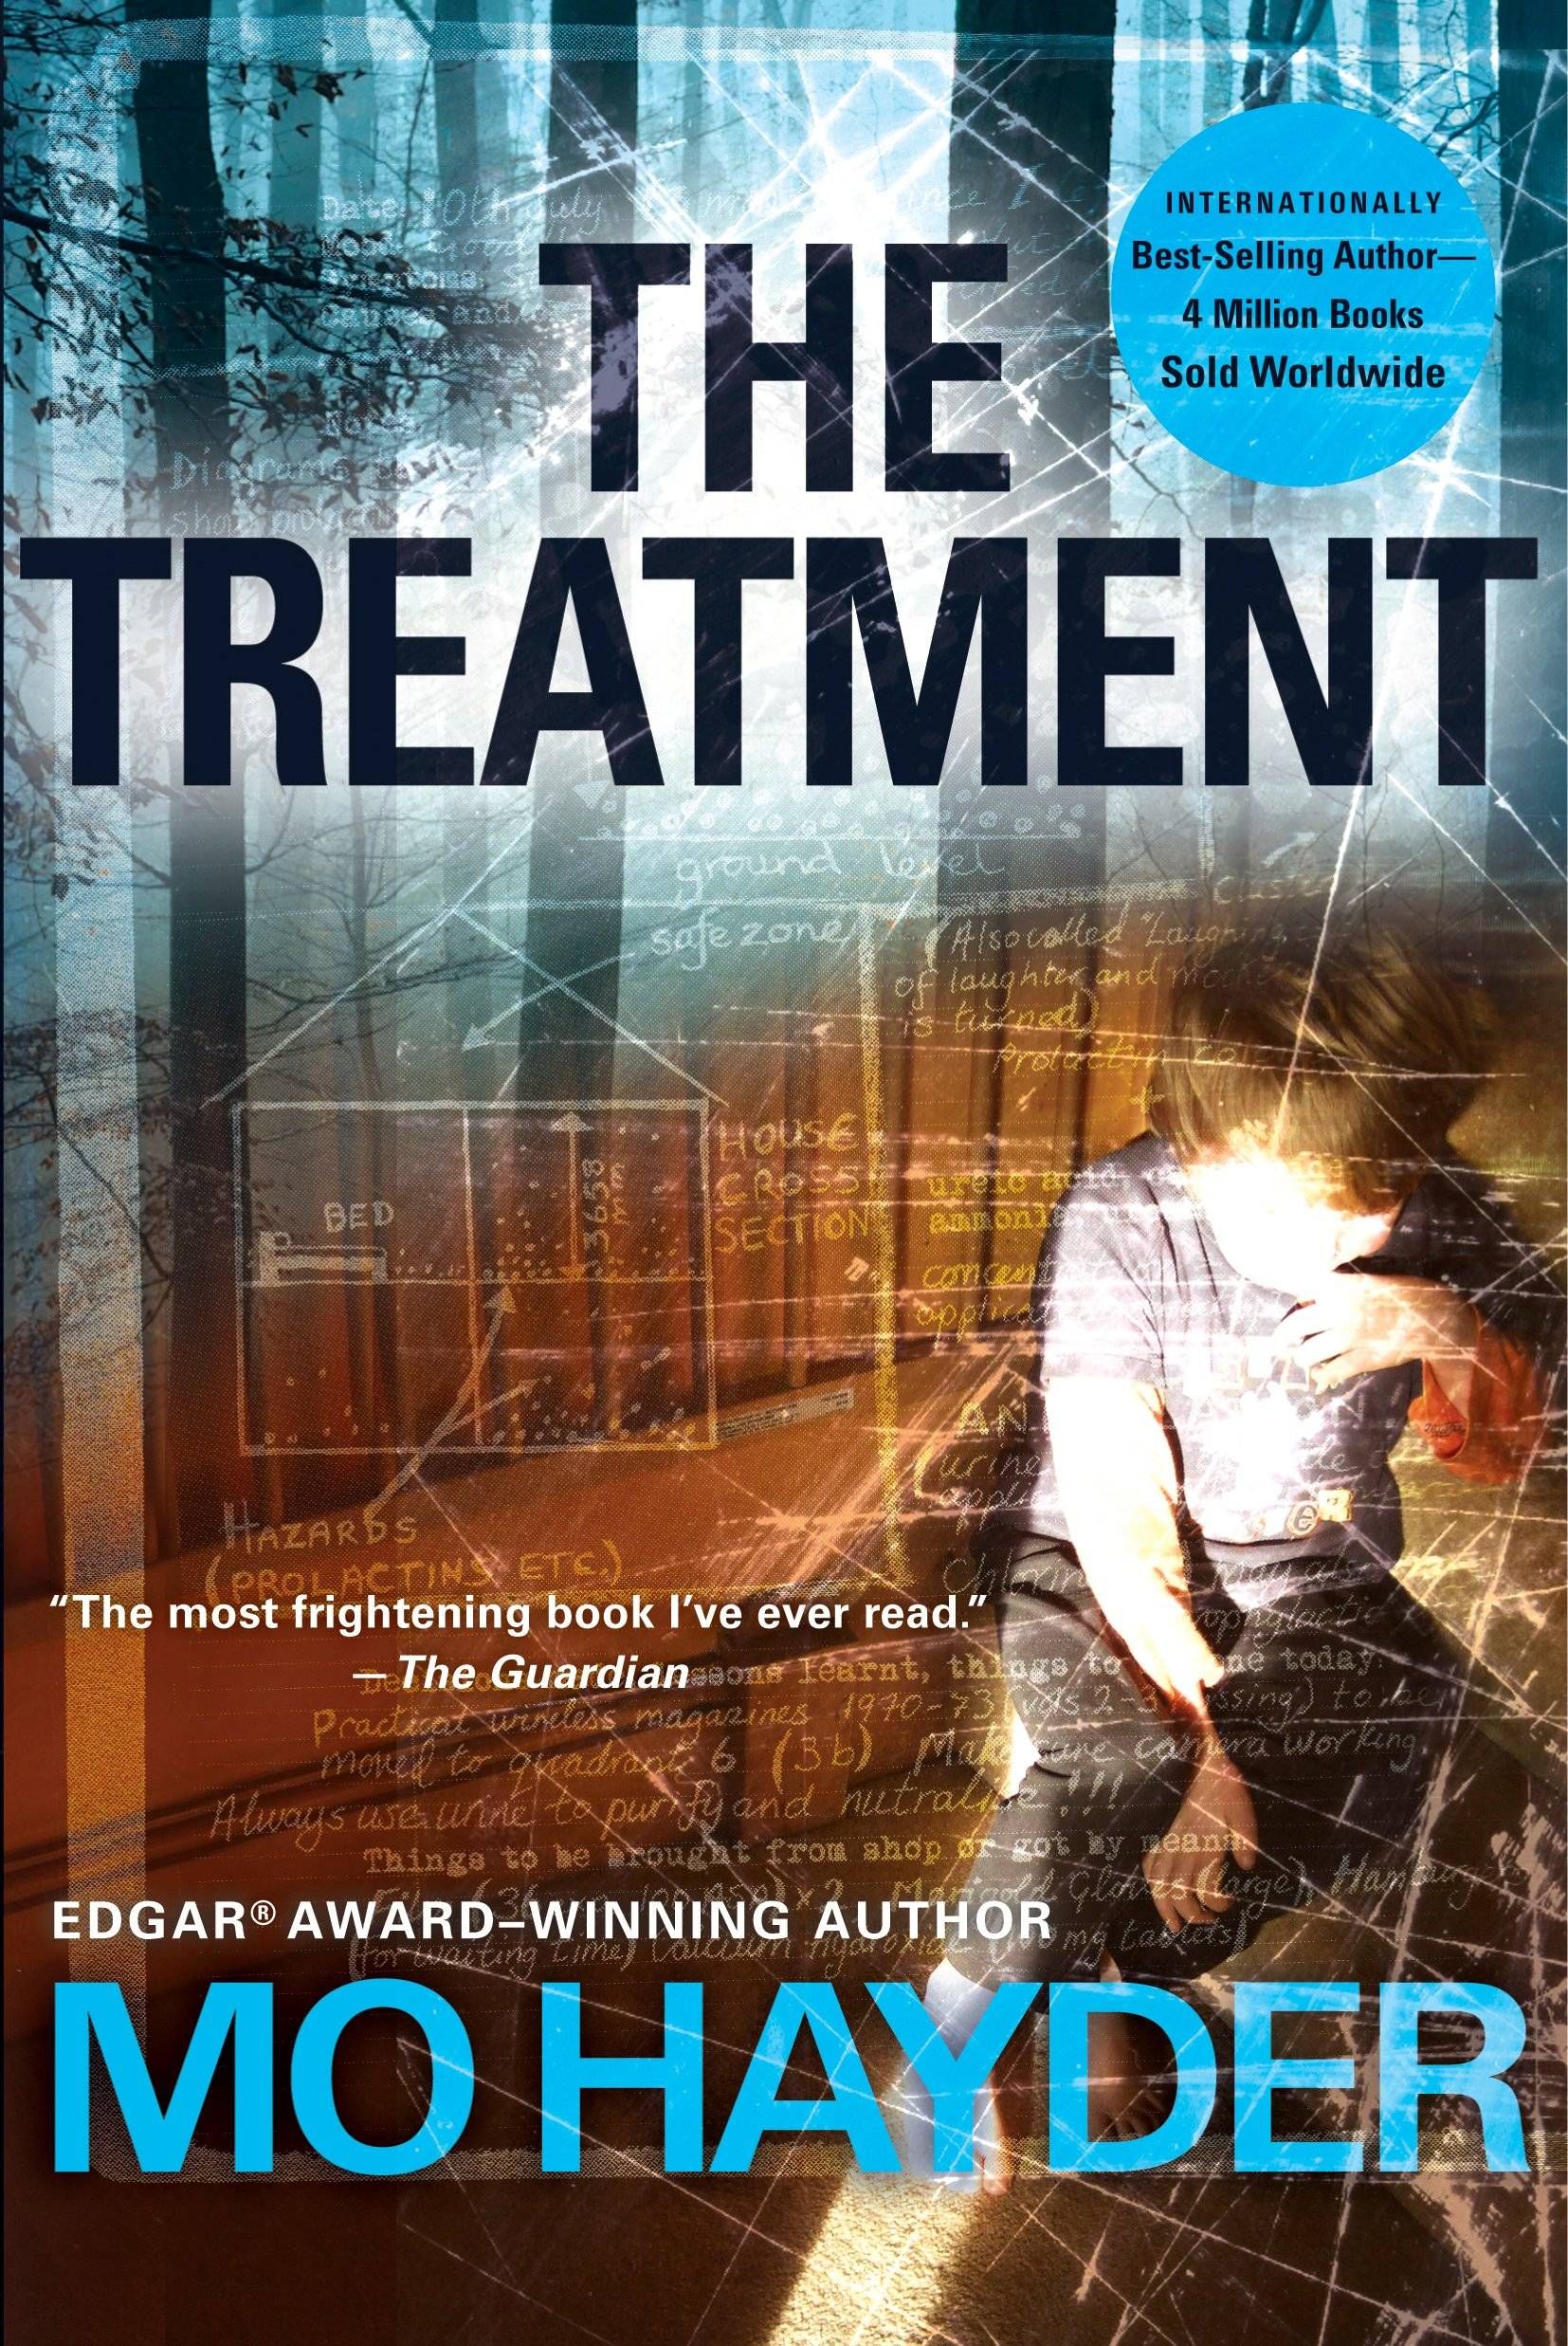 Book cover of The Treatment by Mo Hayder